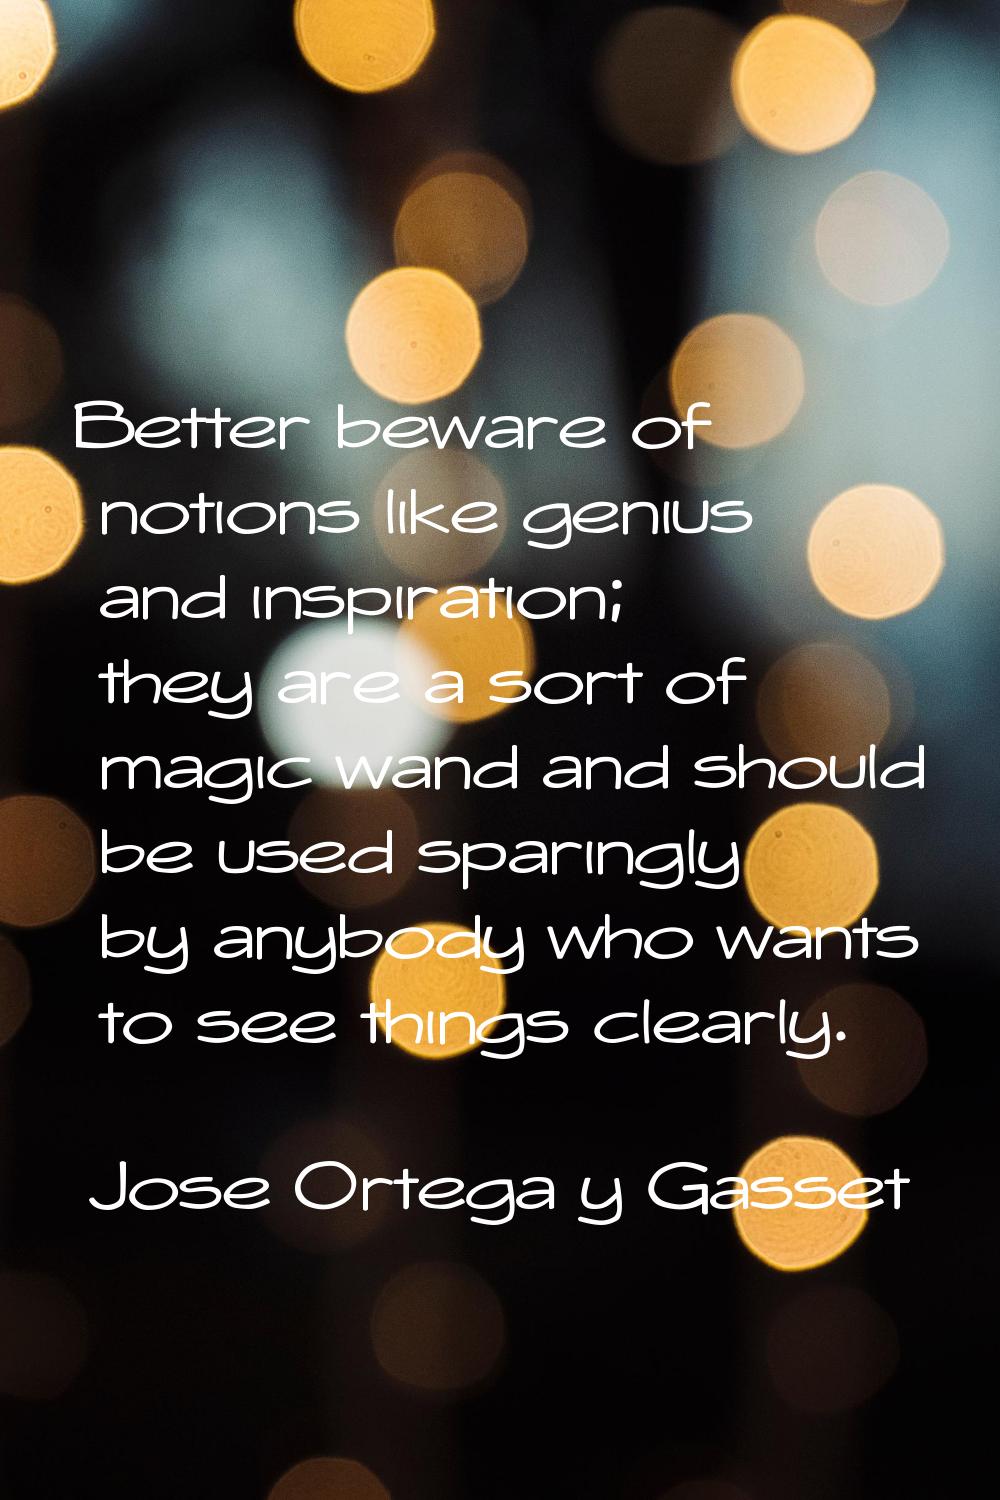 Better beware of notions like genius and inspiration; they are a sort of magic wand and should be u